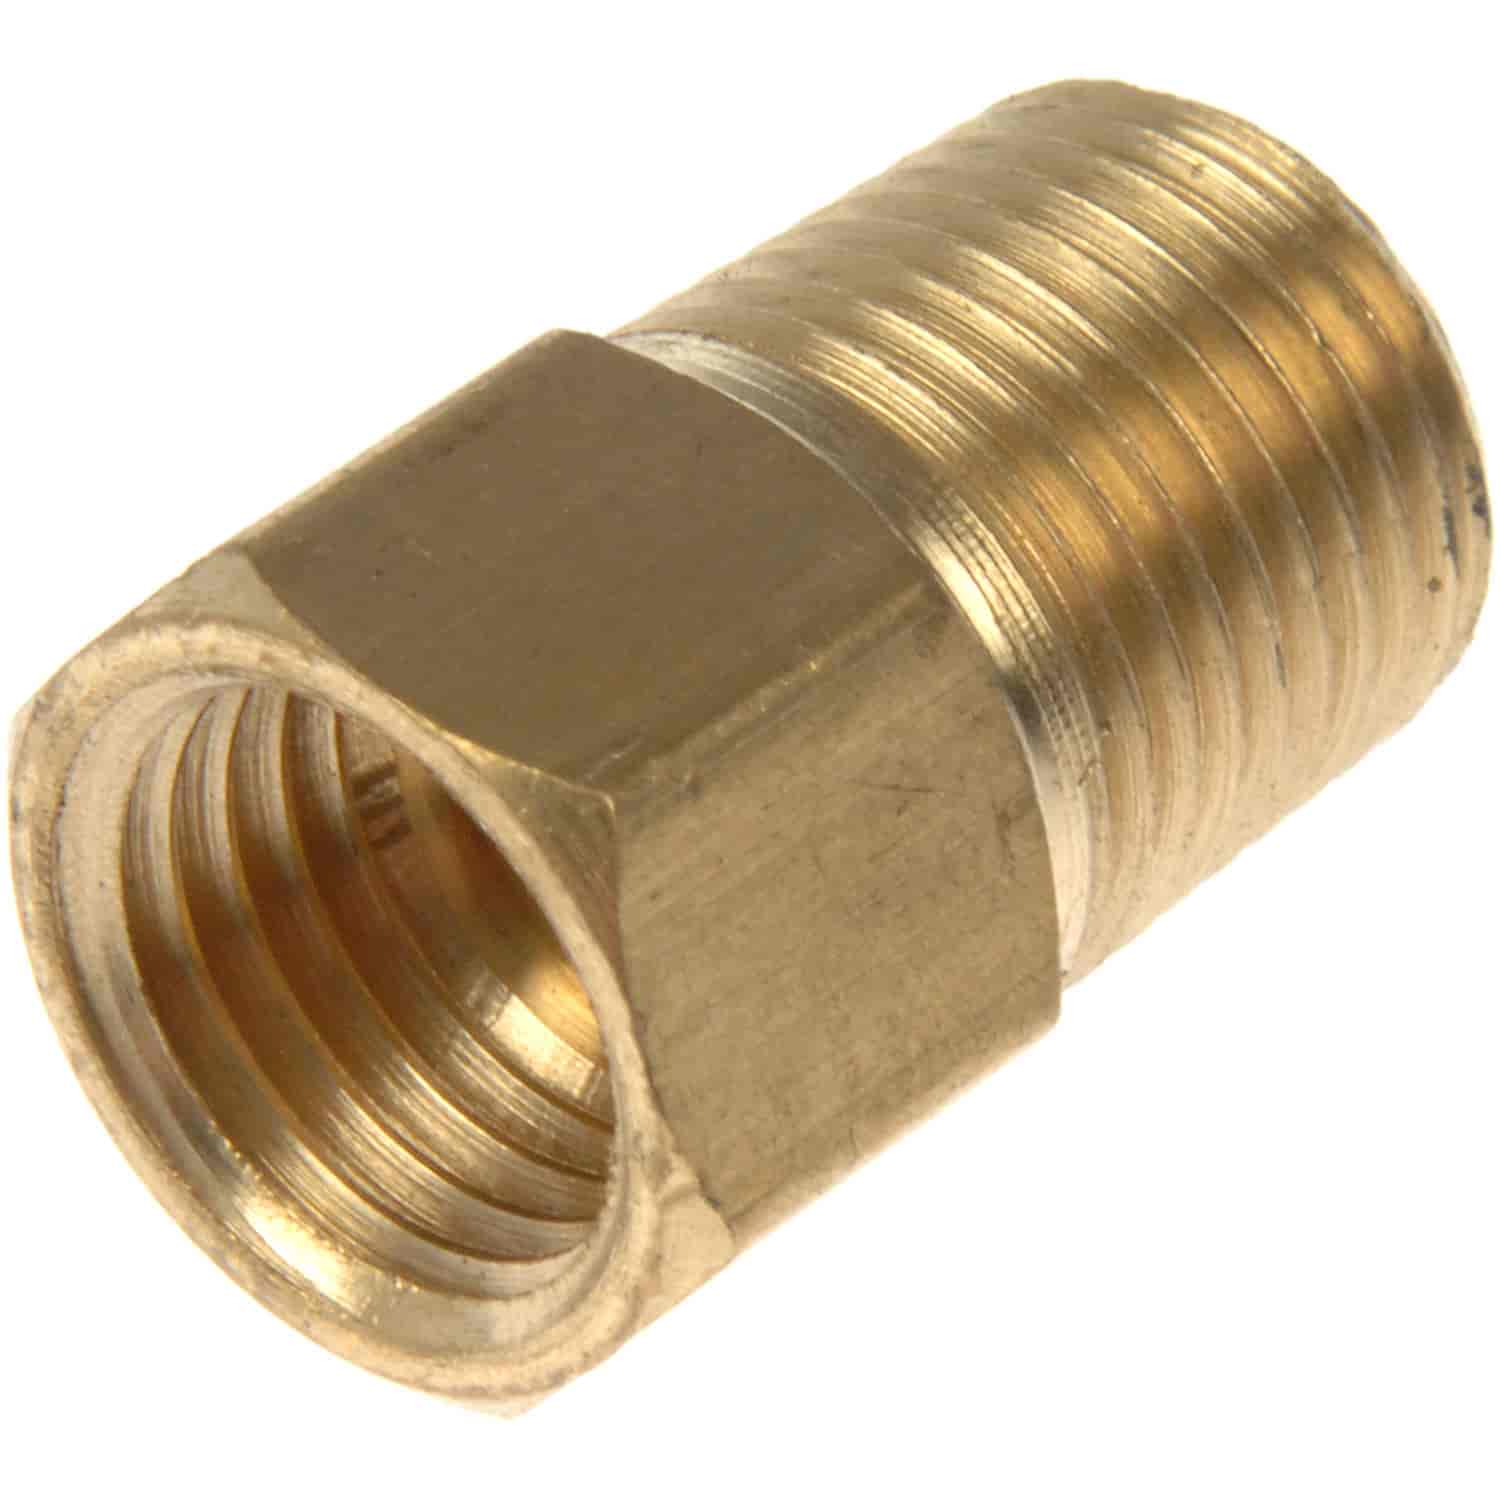 Inverted Flare Fitting, Male Connector, 5/16 in. x